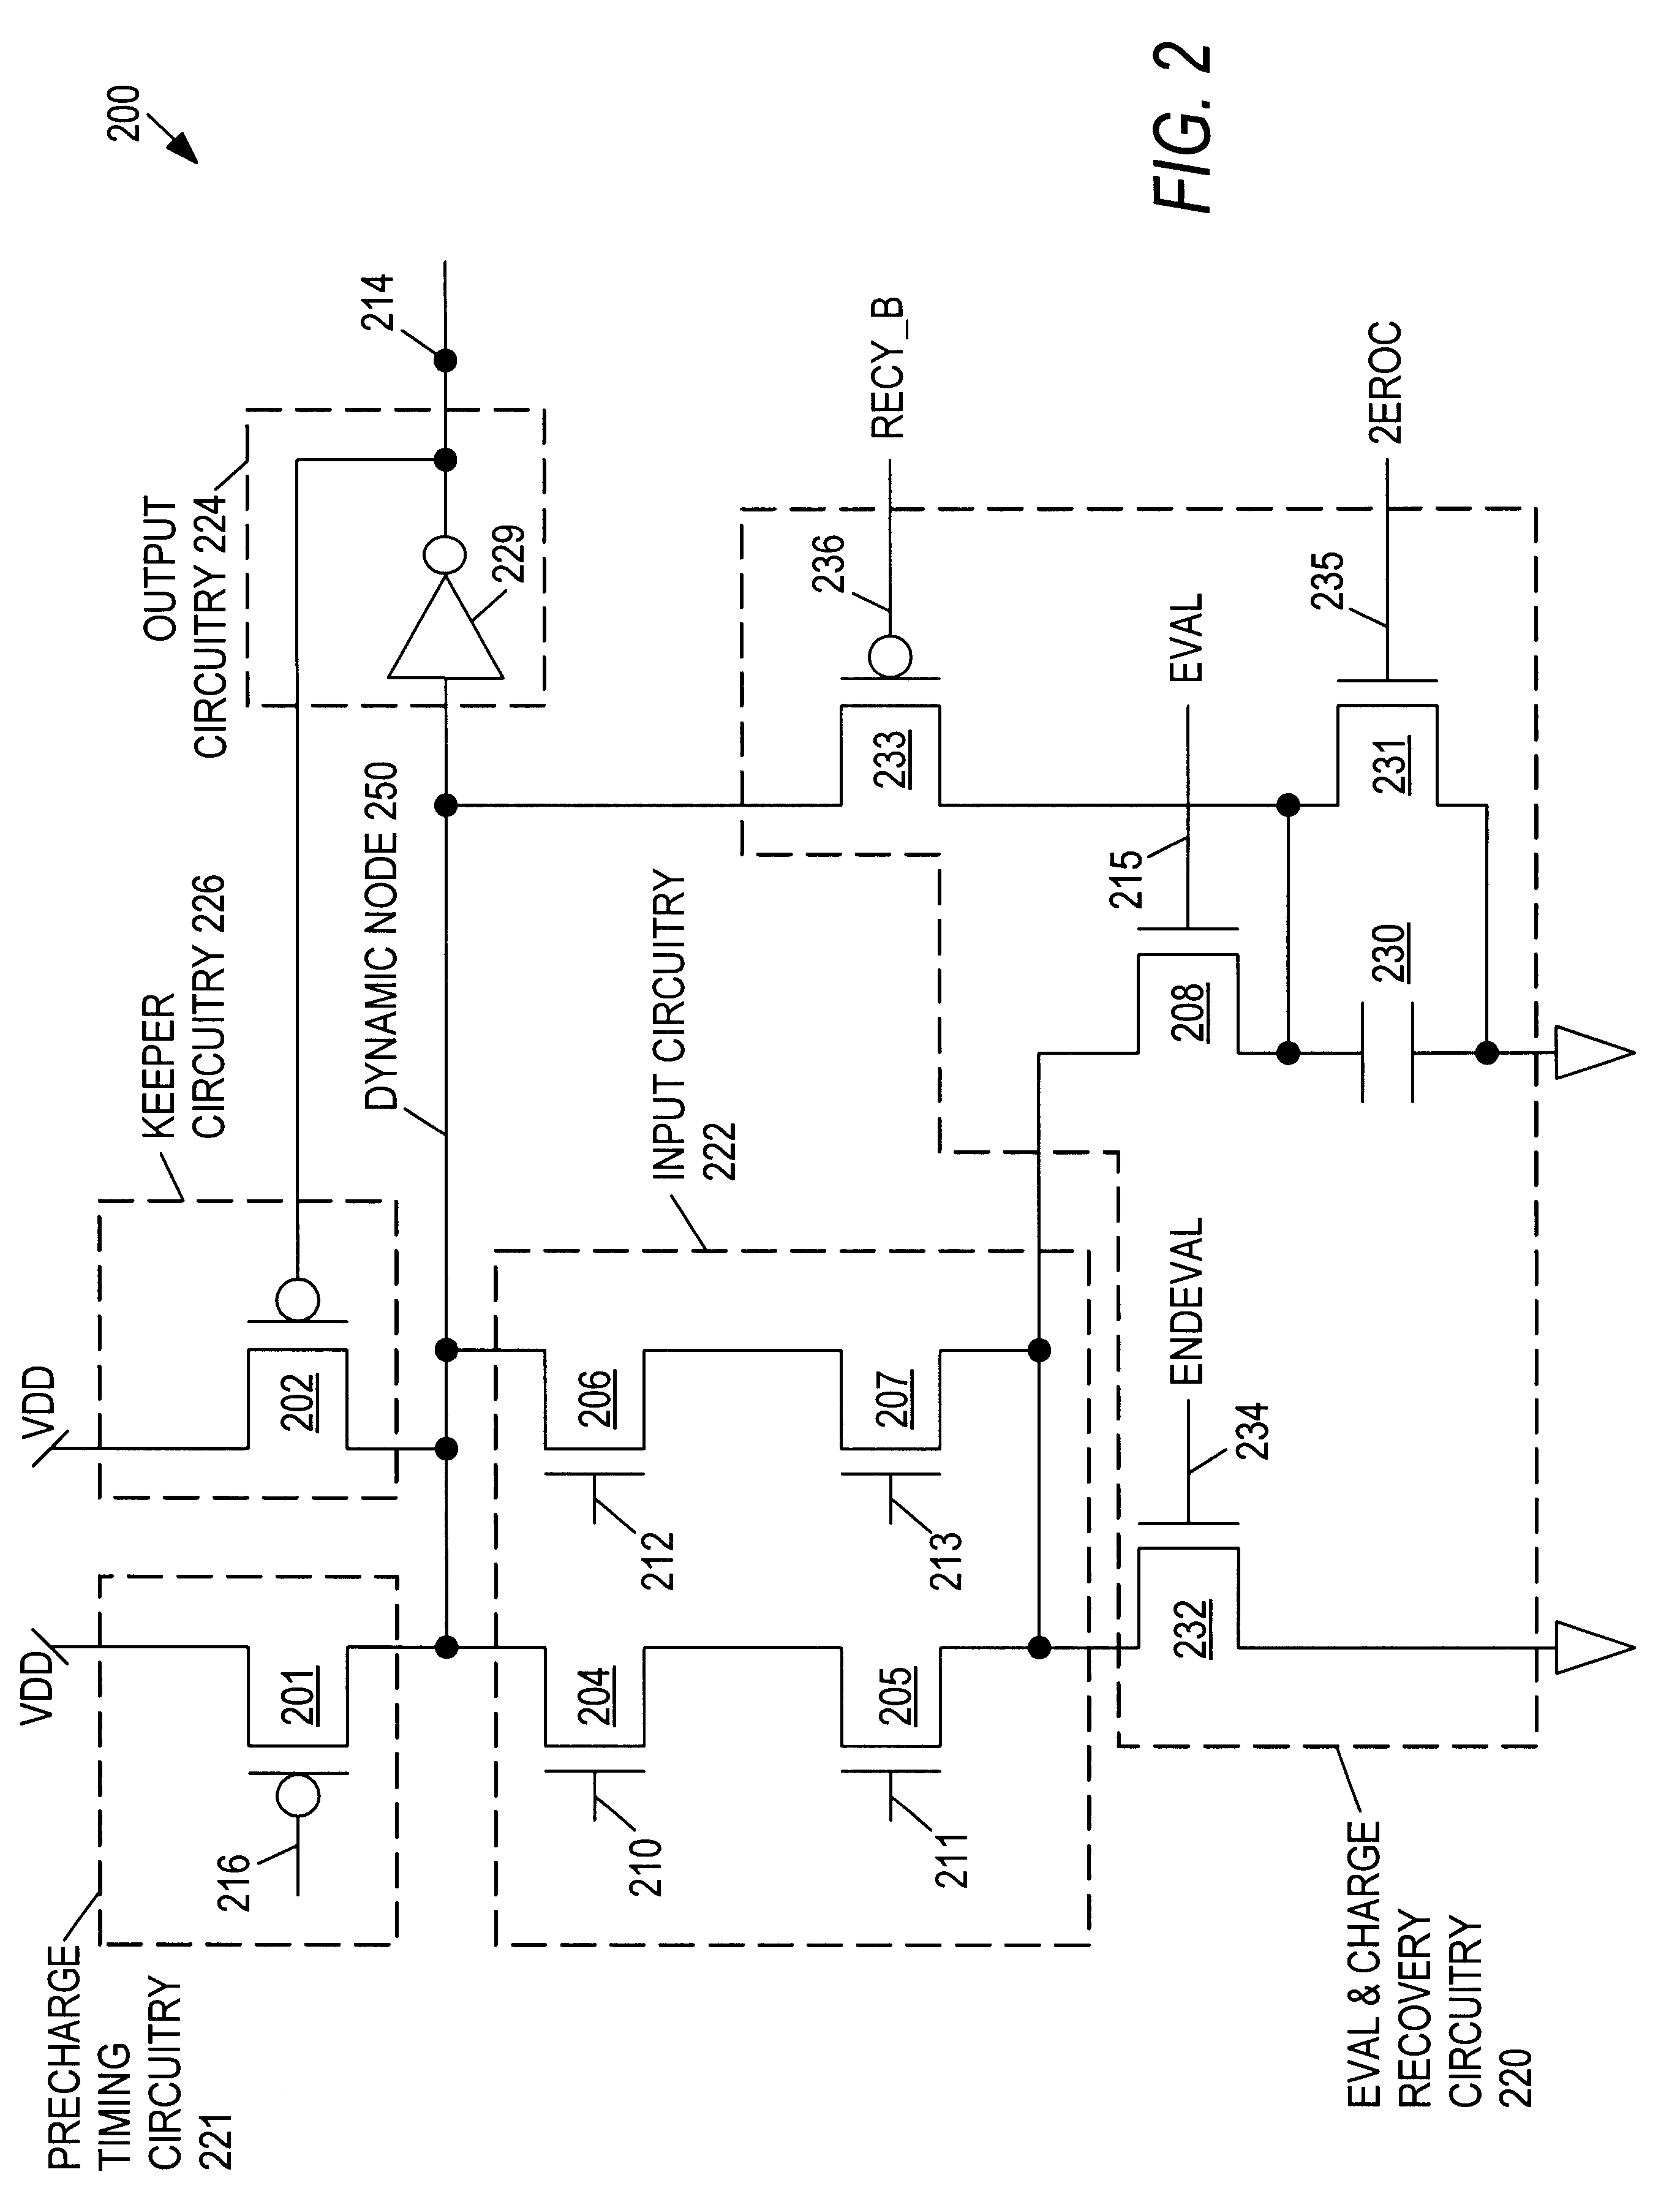 Charge recovery for dynamic circuits